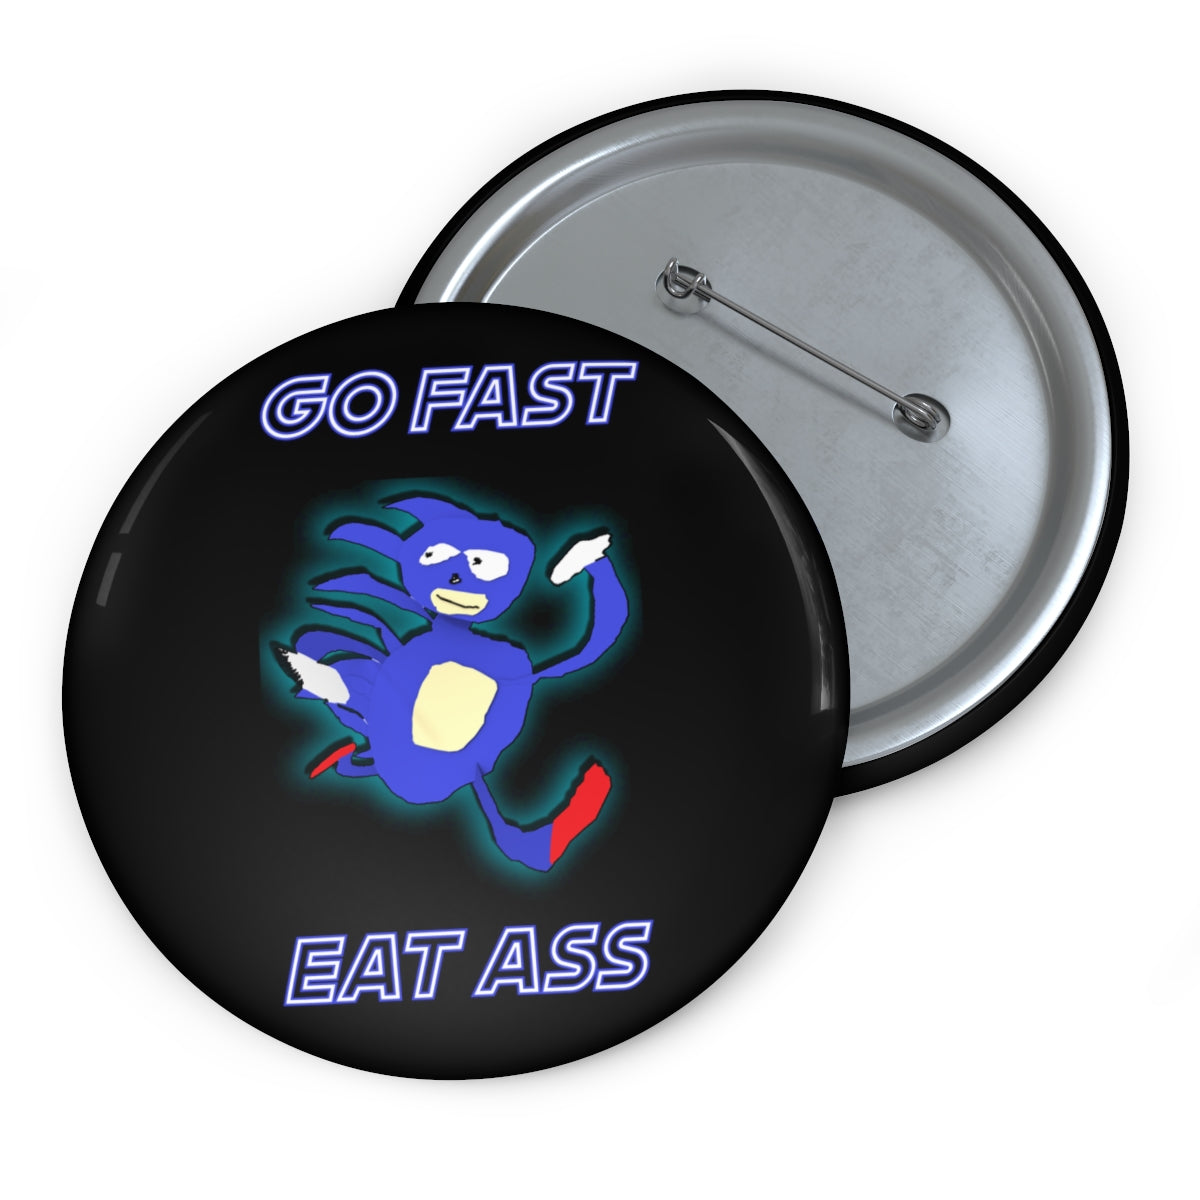 Go Fast Eat Ass Funny Pin // Sanic Meme Buttons